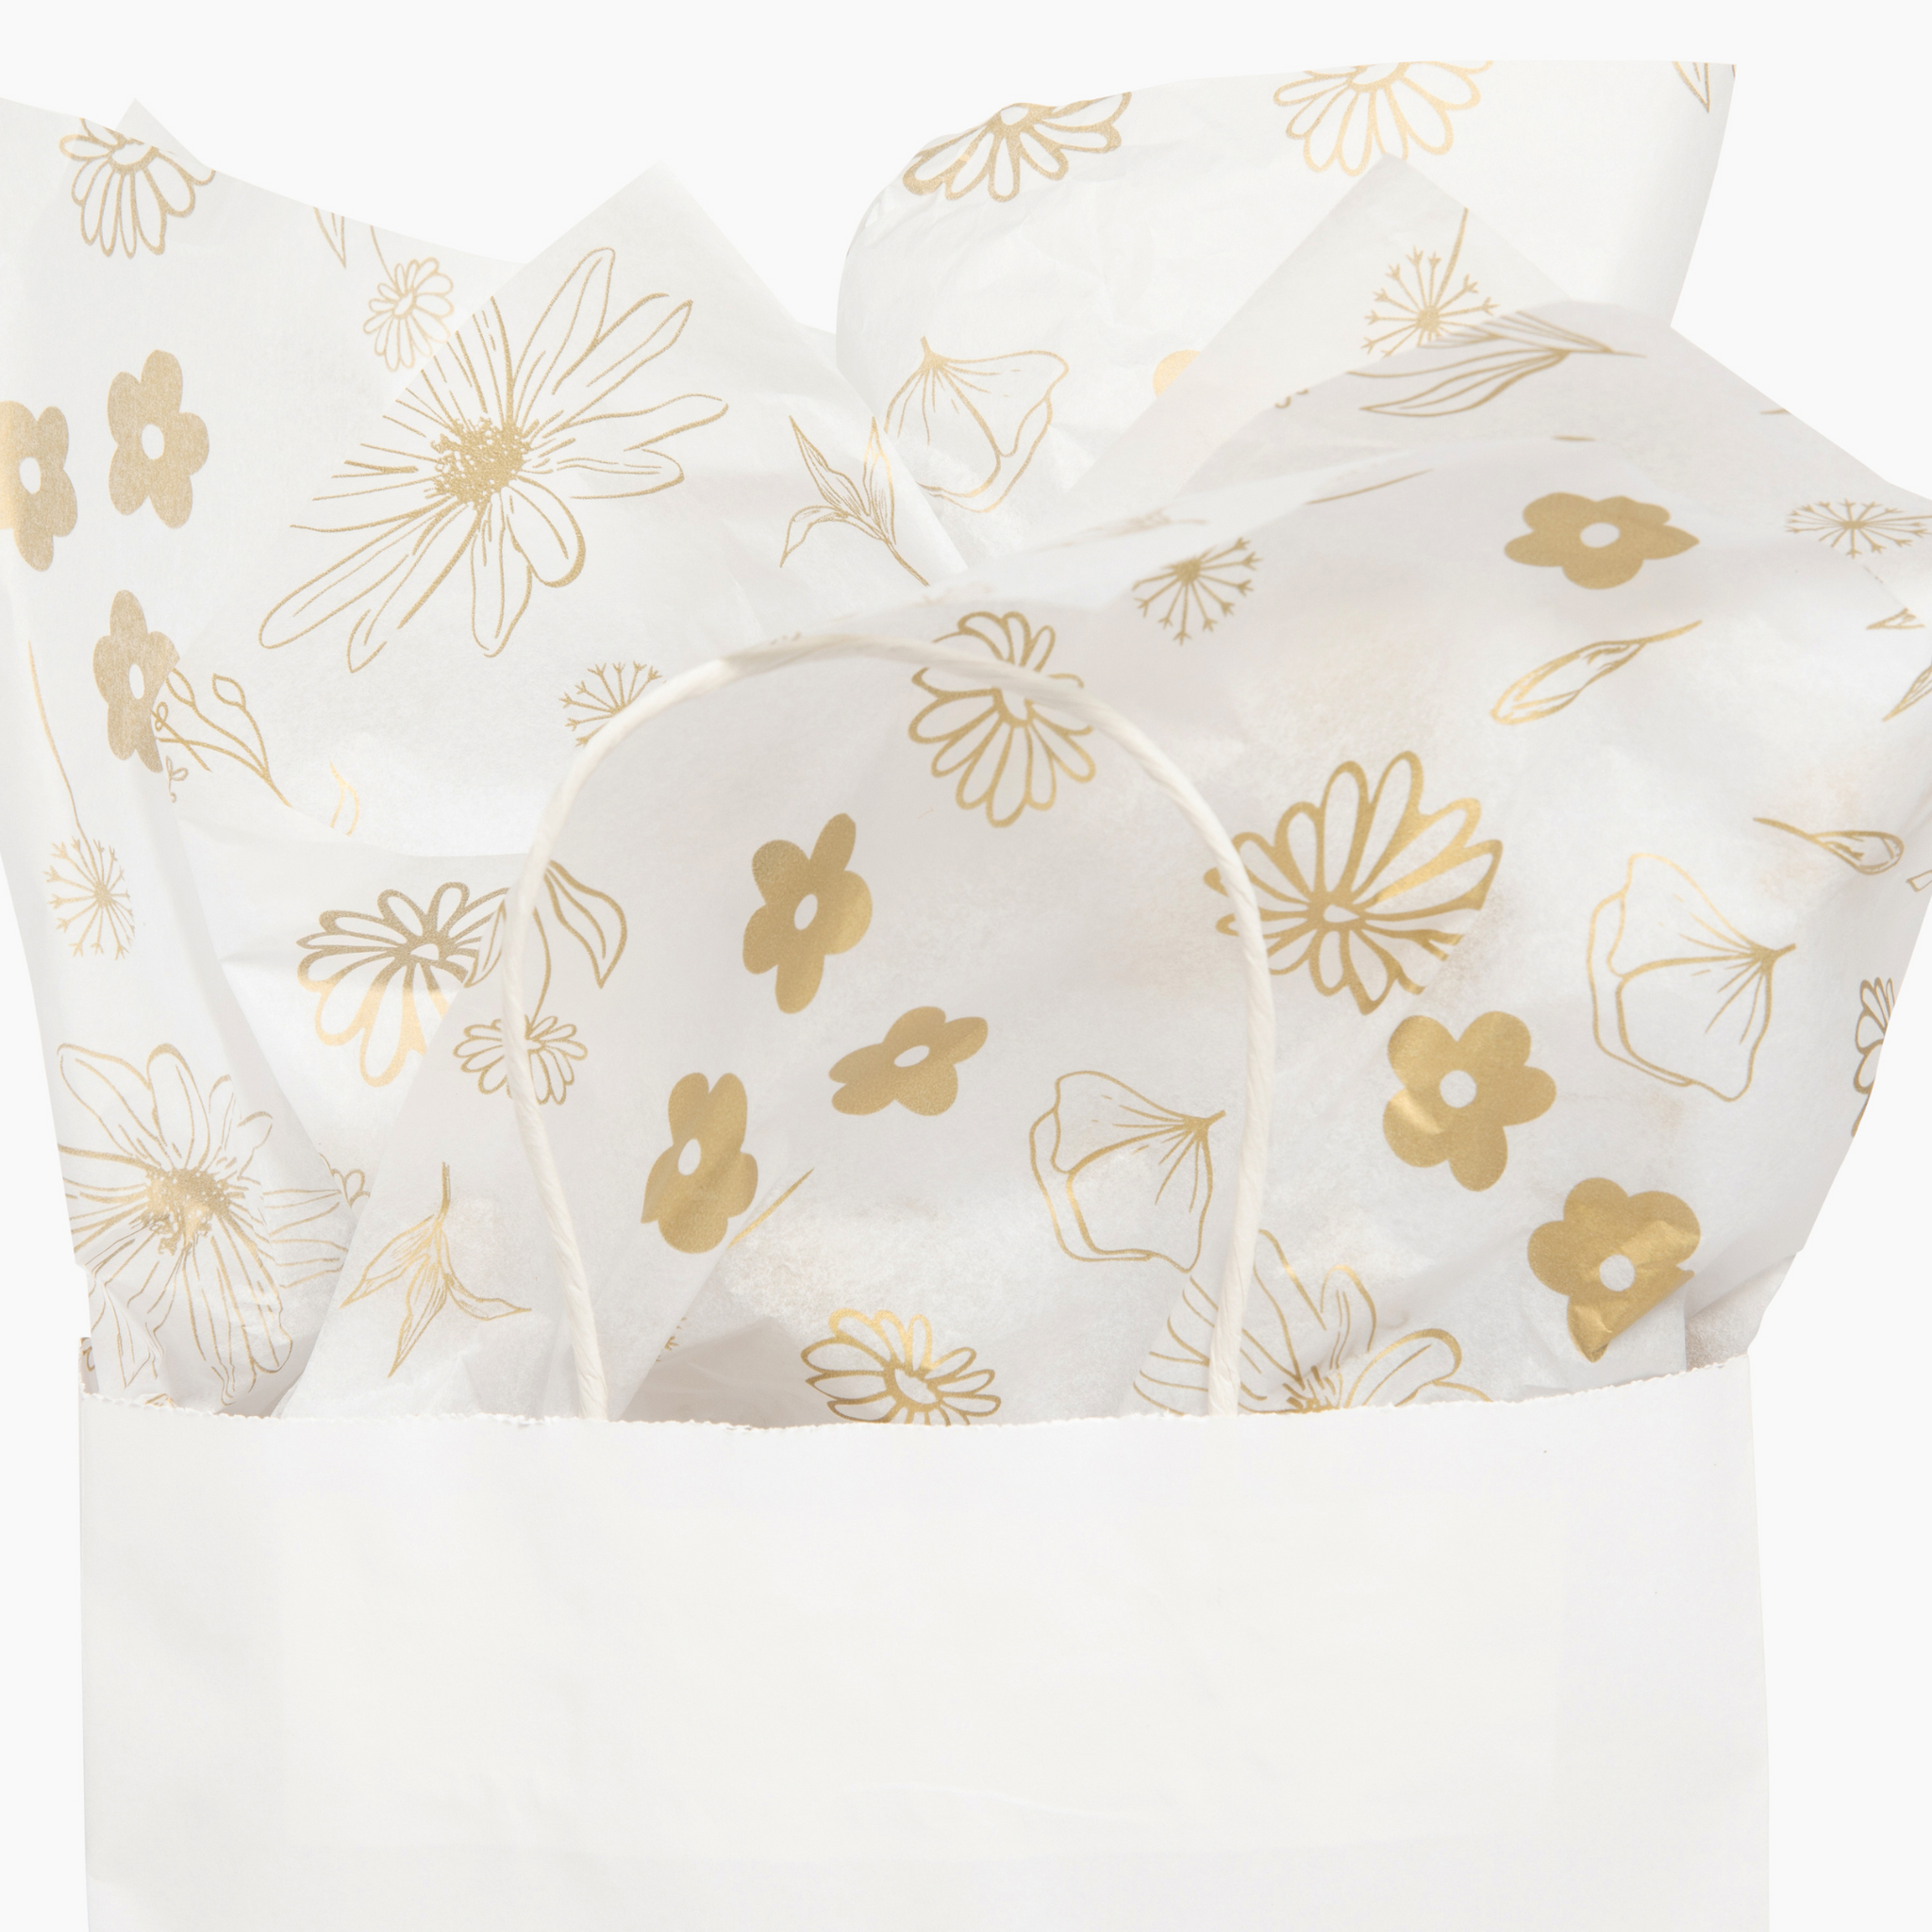 Buy Gold Fleur De Lis Wrapping Paper Sheets Home Malone, Wedding